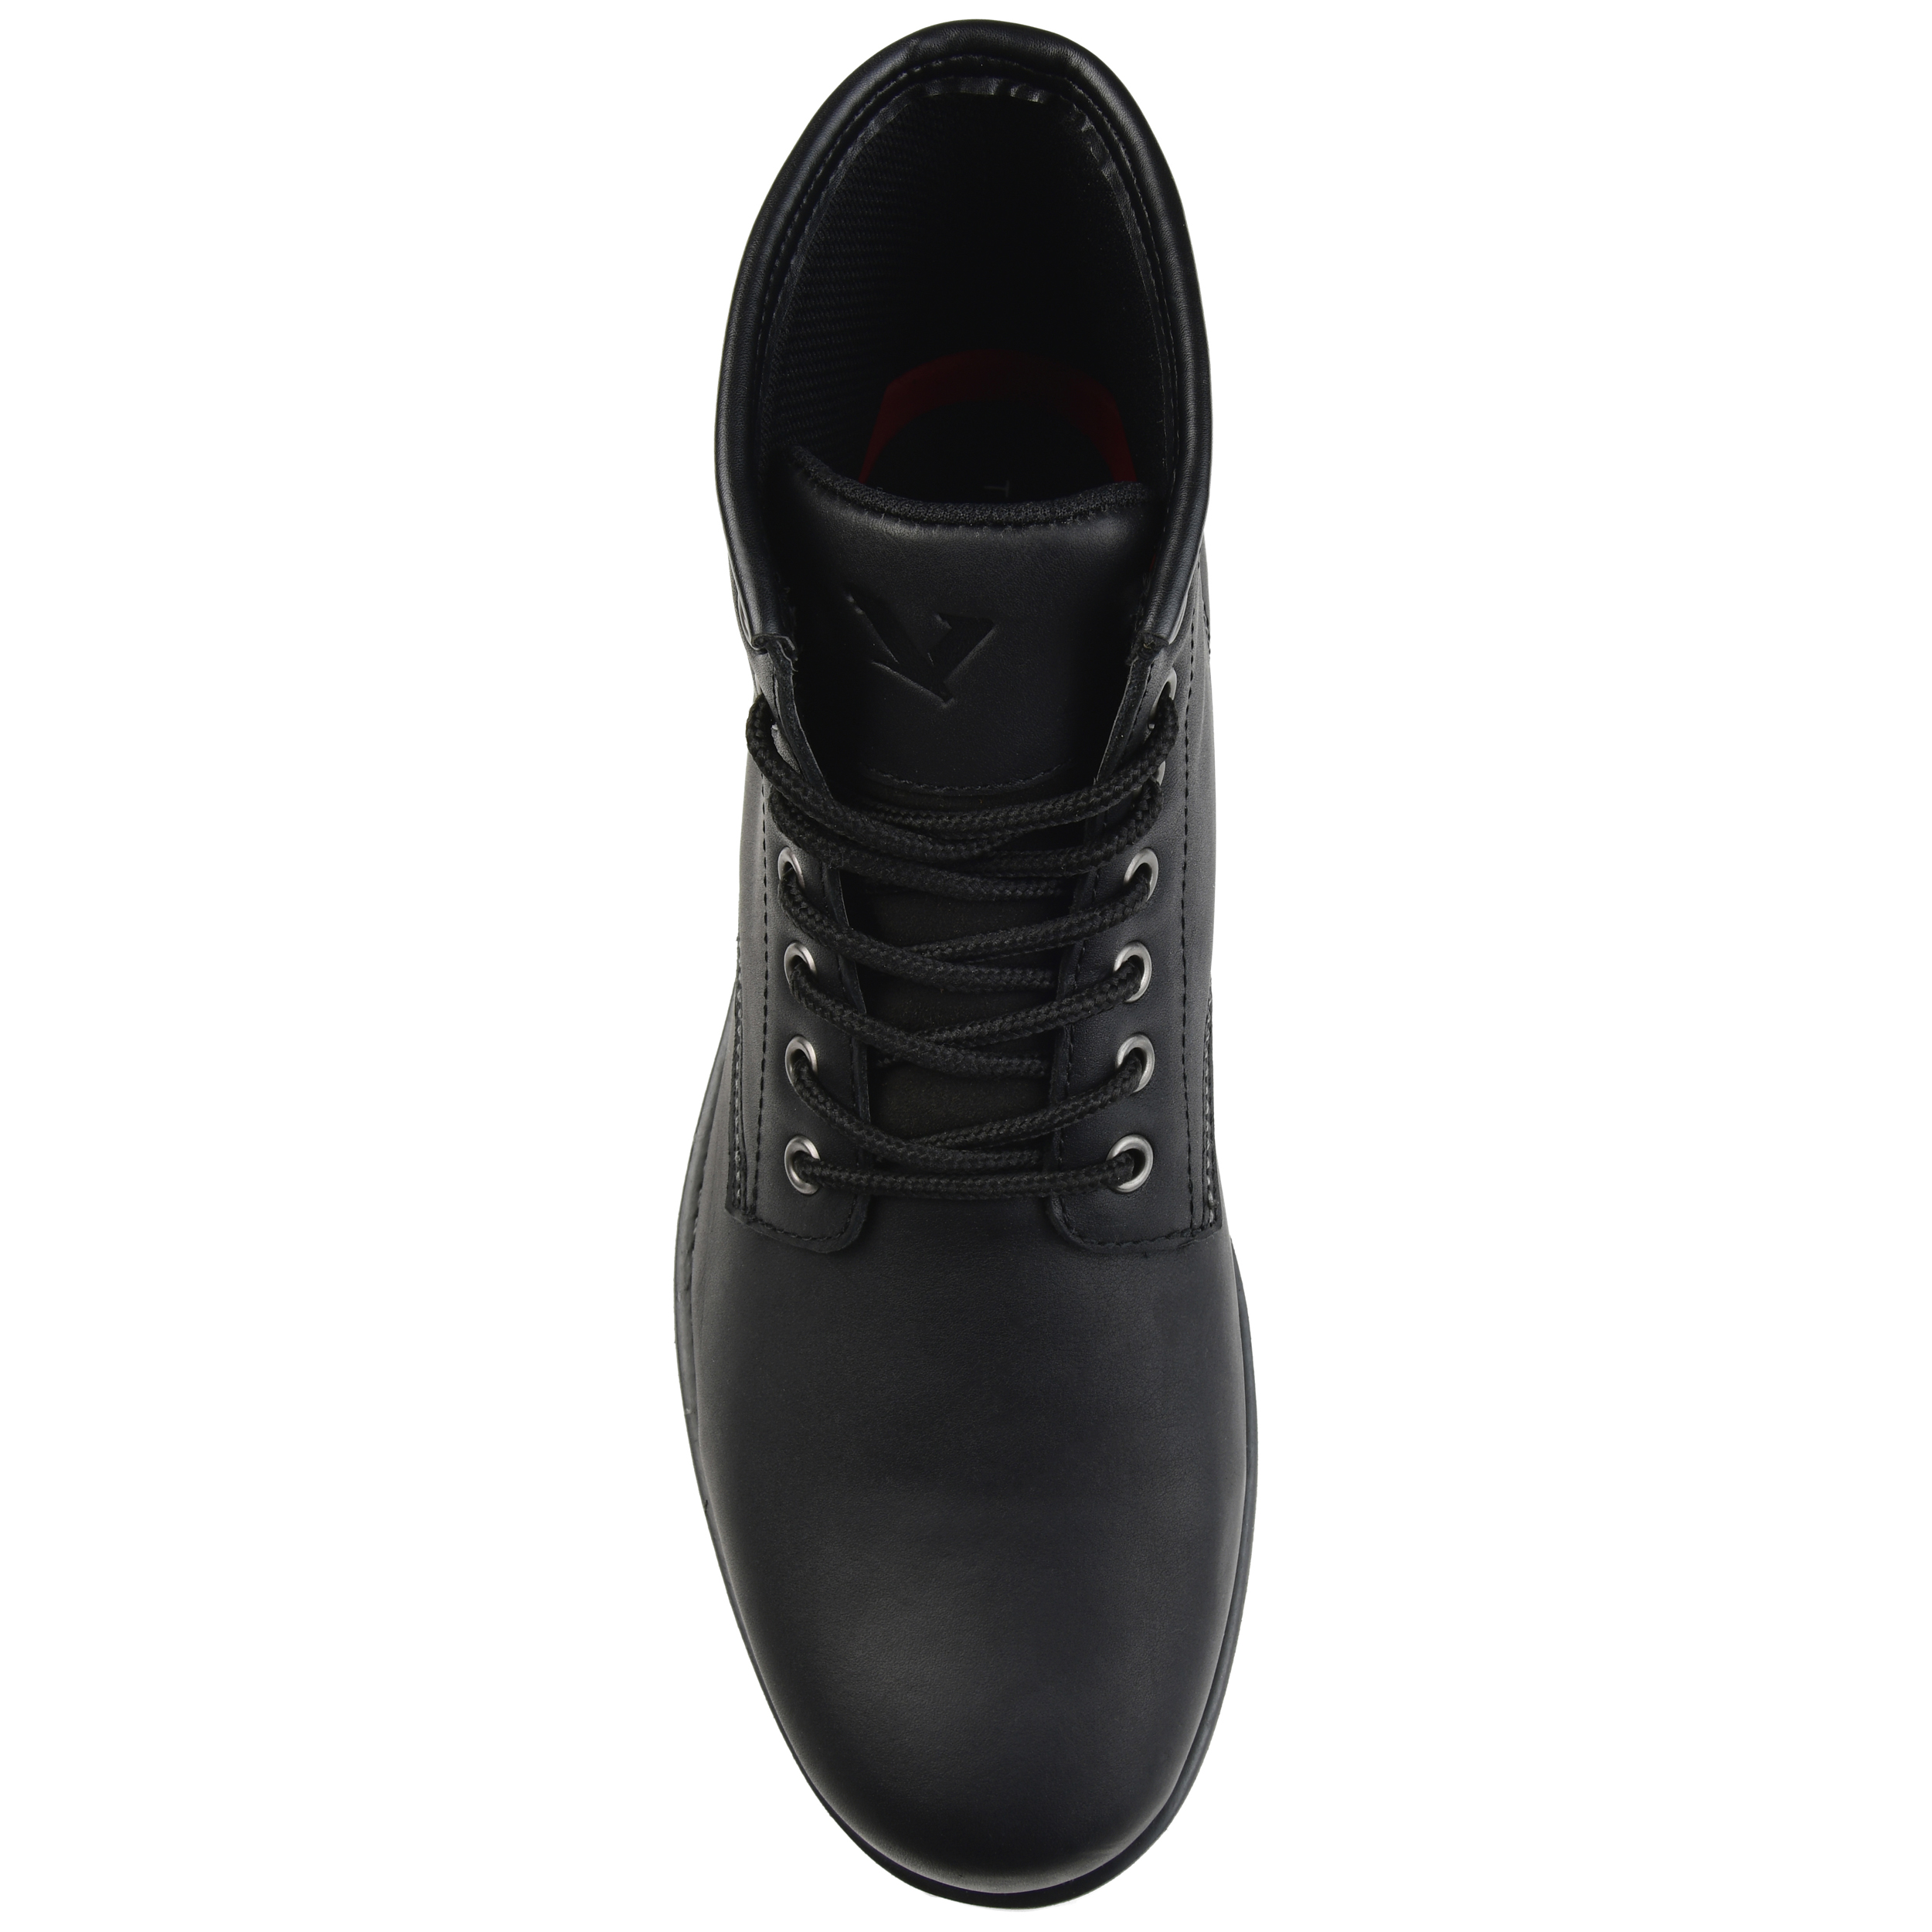 Territory Men's Axel Lace-up Ankle Boot - image 5 of 7